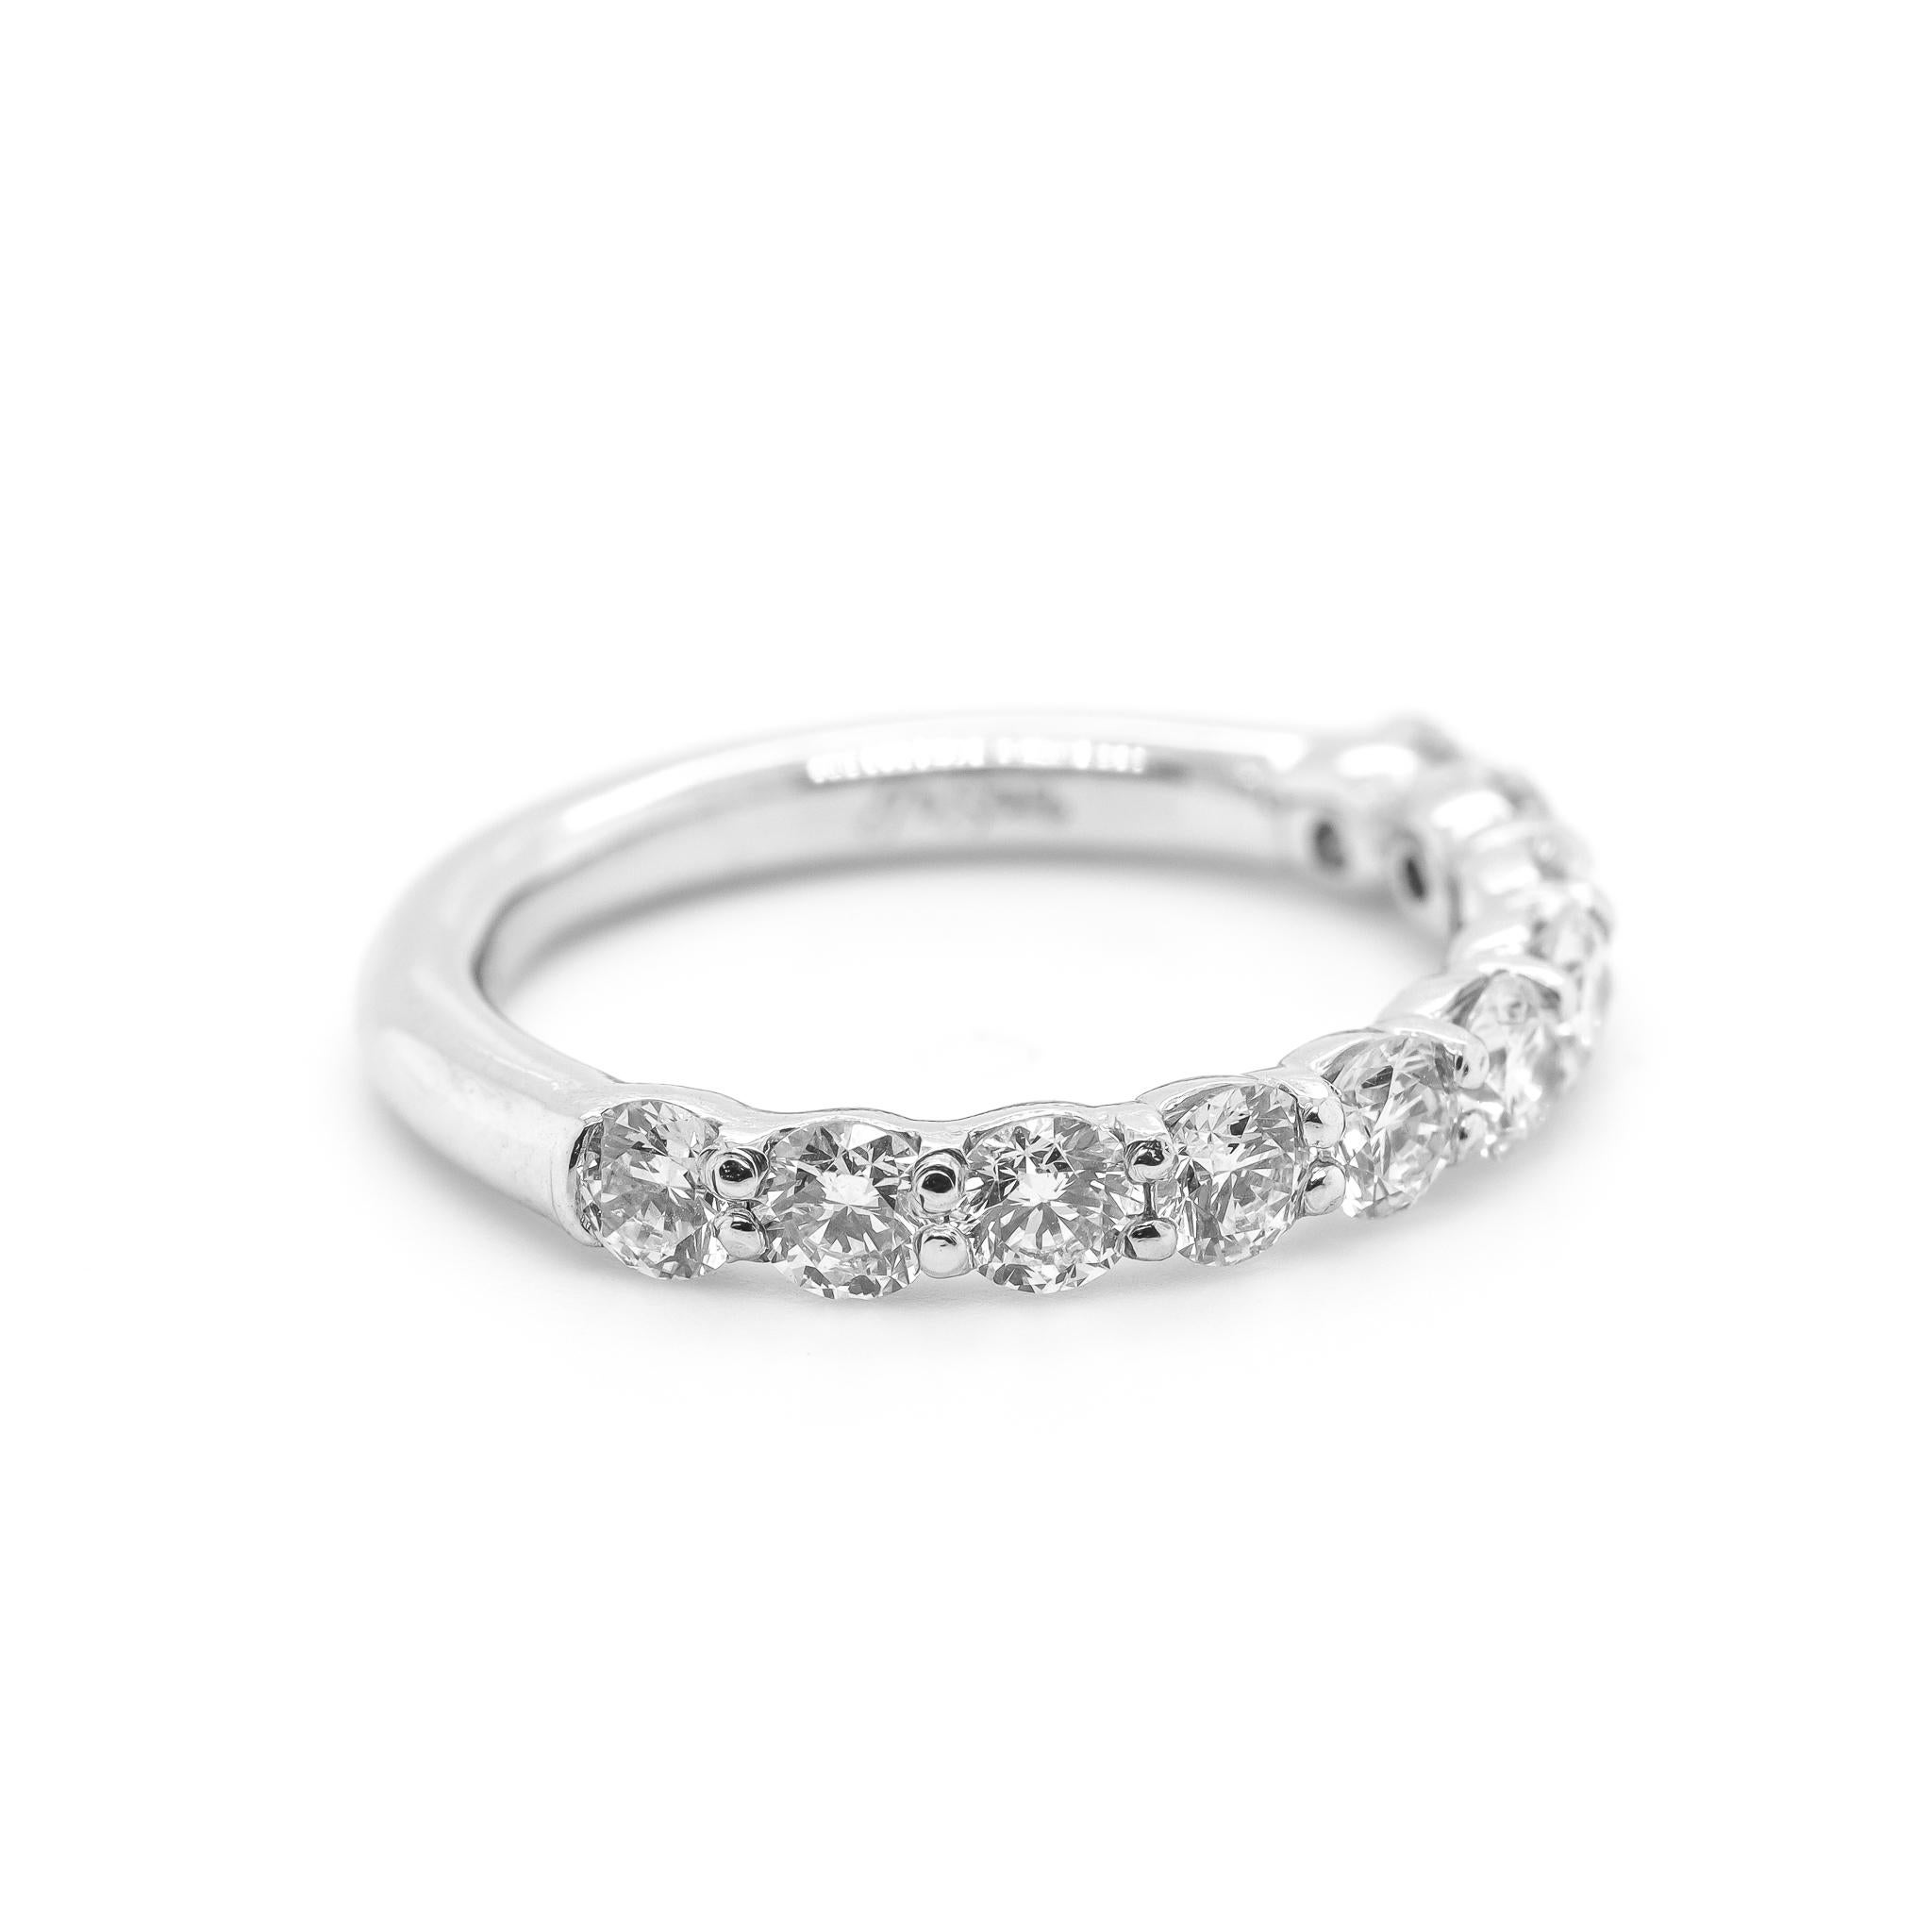 Gender: Ladies

Size: 5

Width: 3.00 mm

Weight: 4.40 grams

One lady's custom made polished 900 platinum ten-across, diamond wedding, semi-eternity band with a half-round shank.  Engraved with 